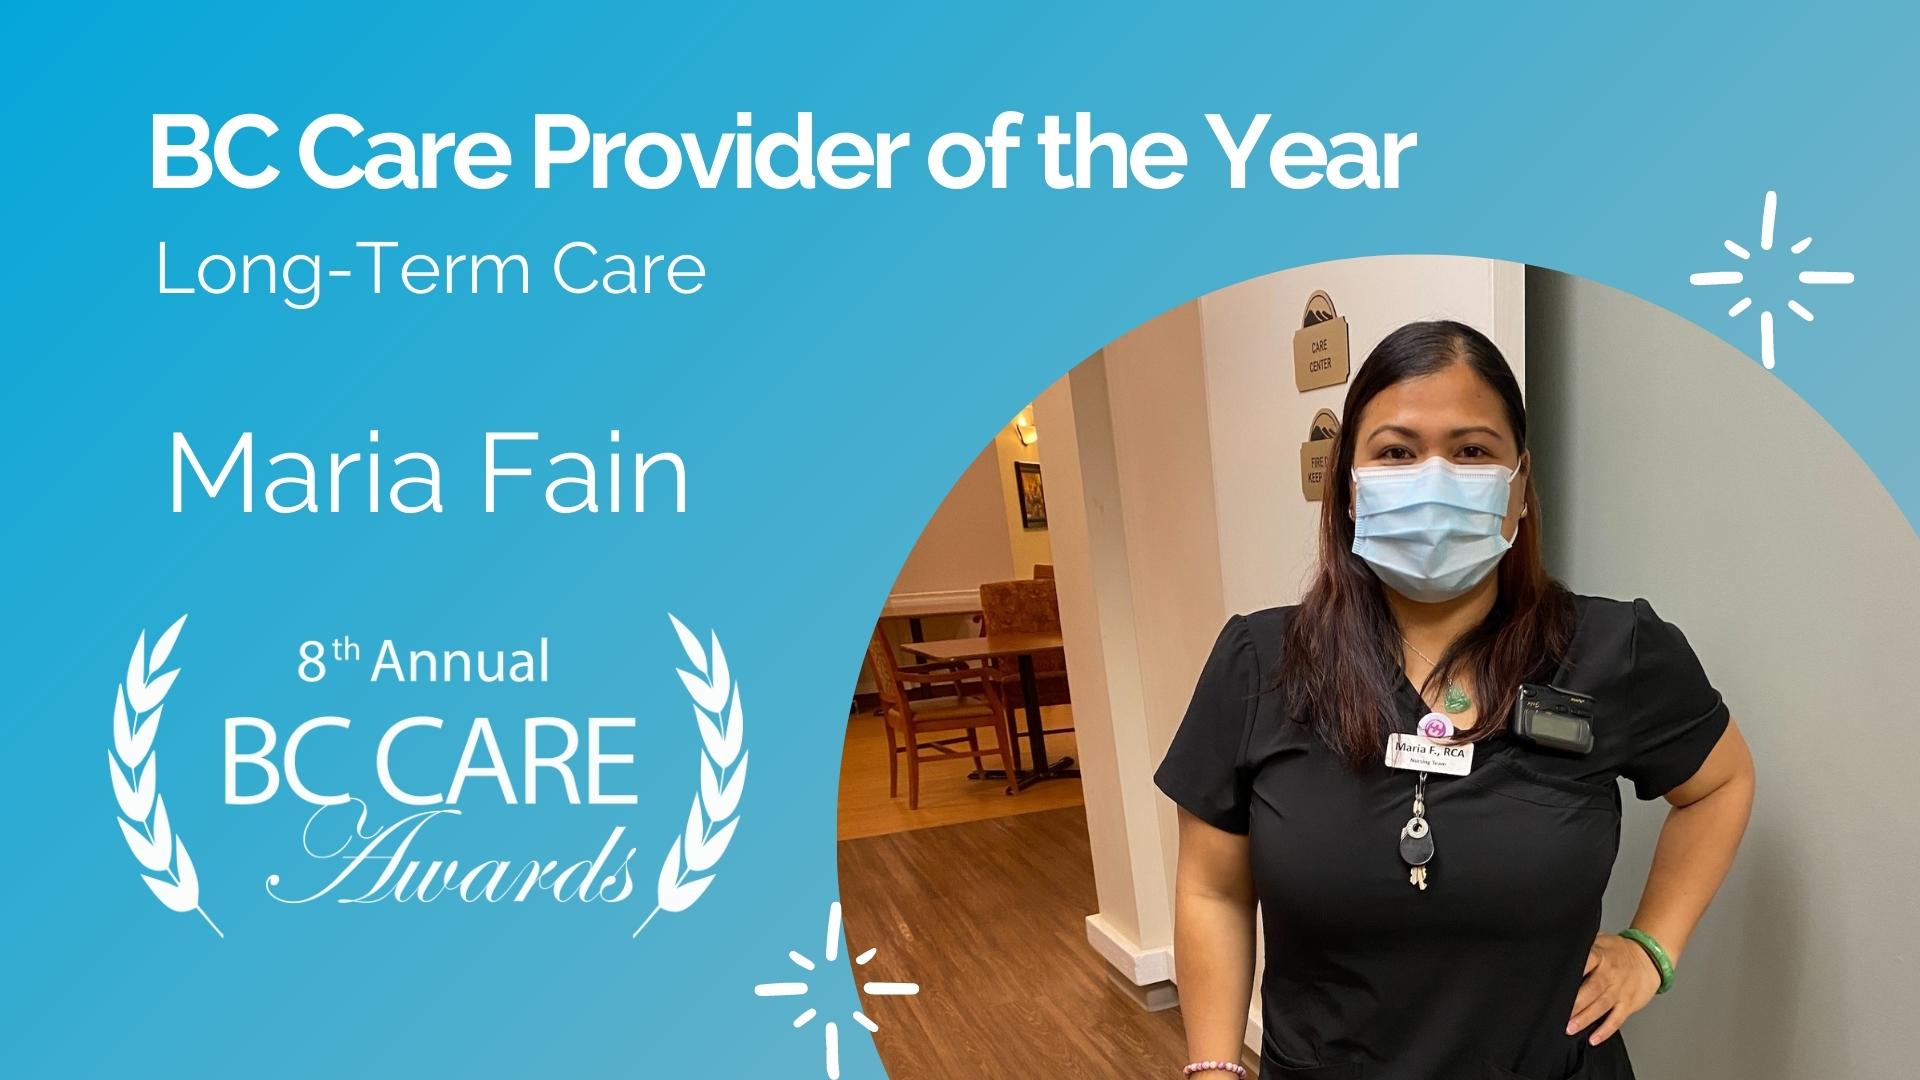 Congratulations, Maria Fain! Winner of the BC Care Provider of the Year award (Long-Term Care category)